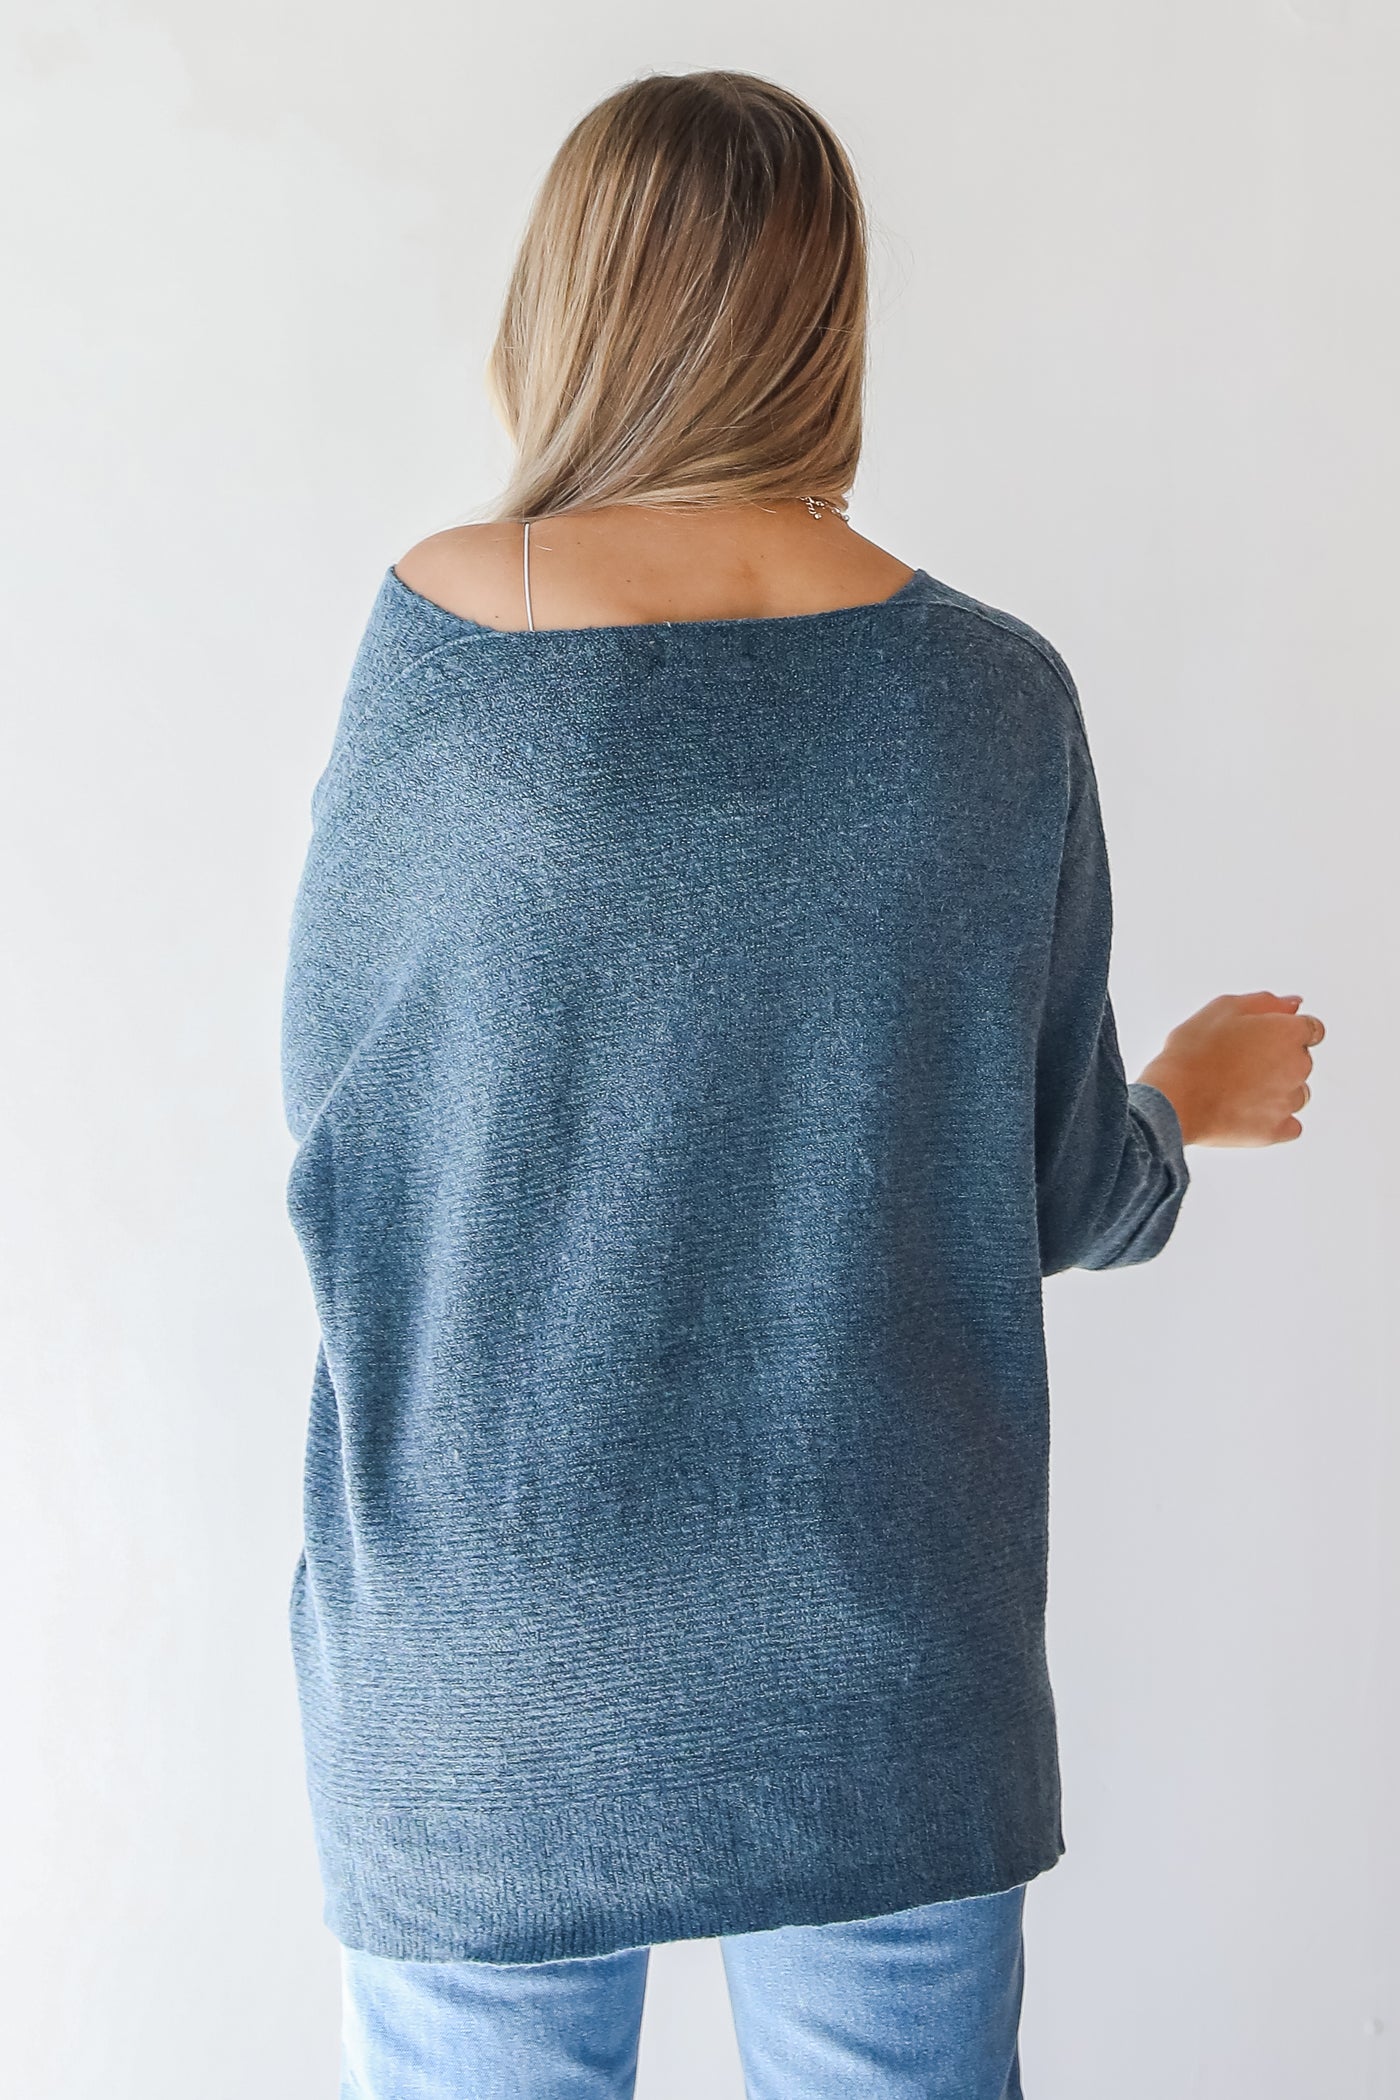 Oversized Sweater in teal back view